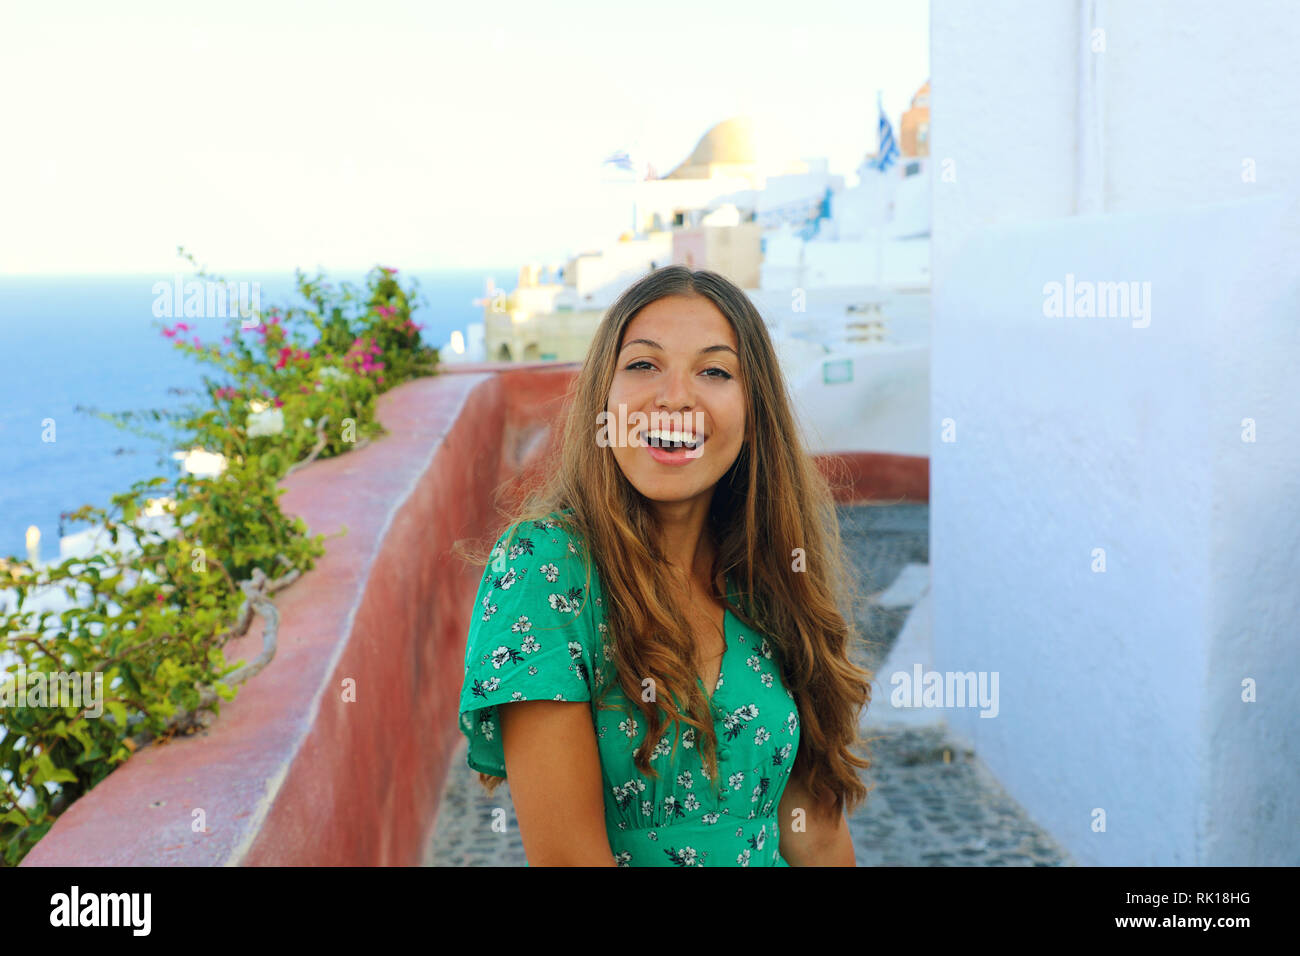 Santorini cheerful travel tourist woman visiting famous white village of Oia. Smiling tanned girl in green dress in Santorini, Cyclades, Greece. Stock Photo